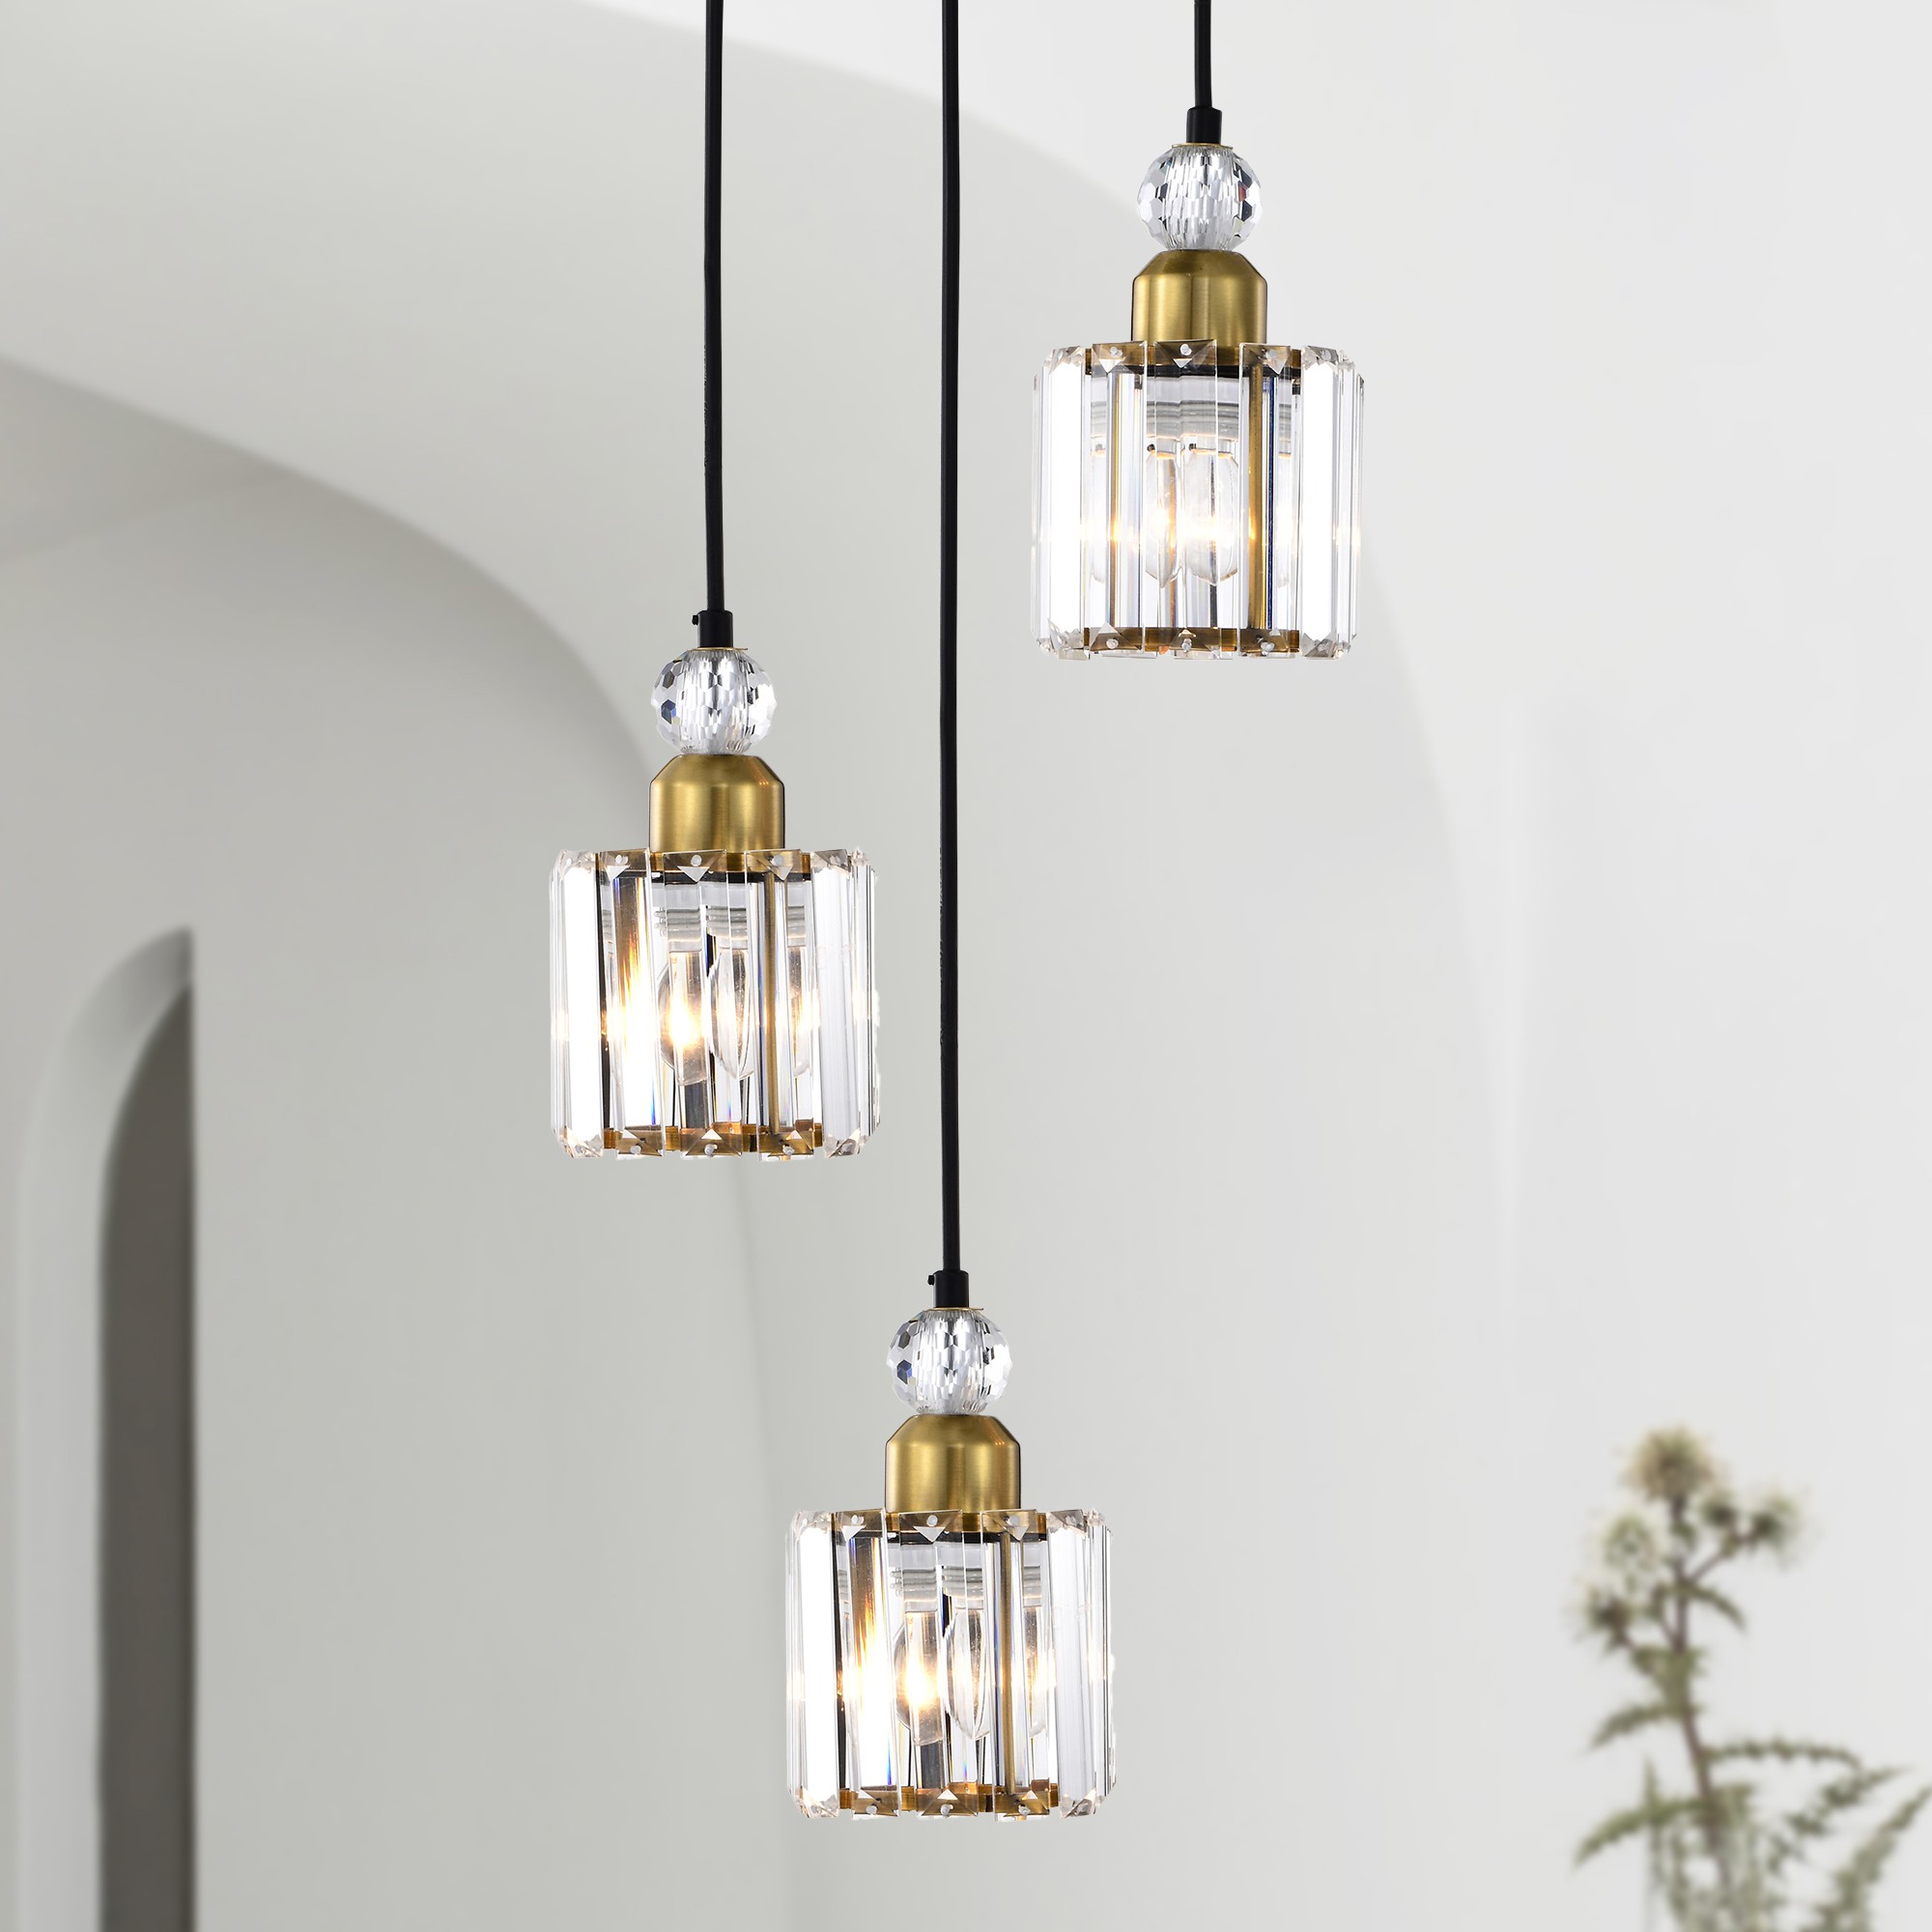 Srai 11 in. 3-Light Indoor Matte Black and Brass Finish Chandelier with Light Kit